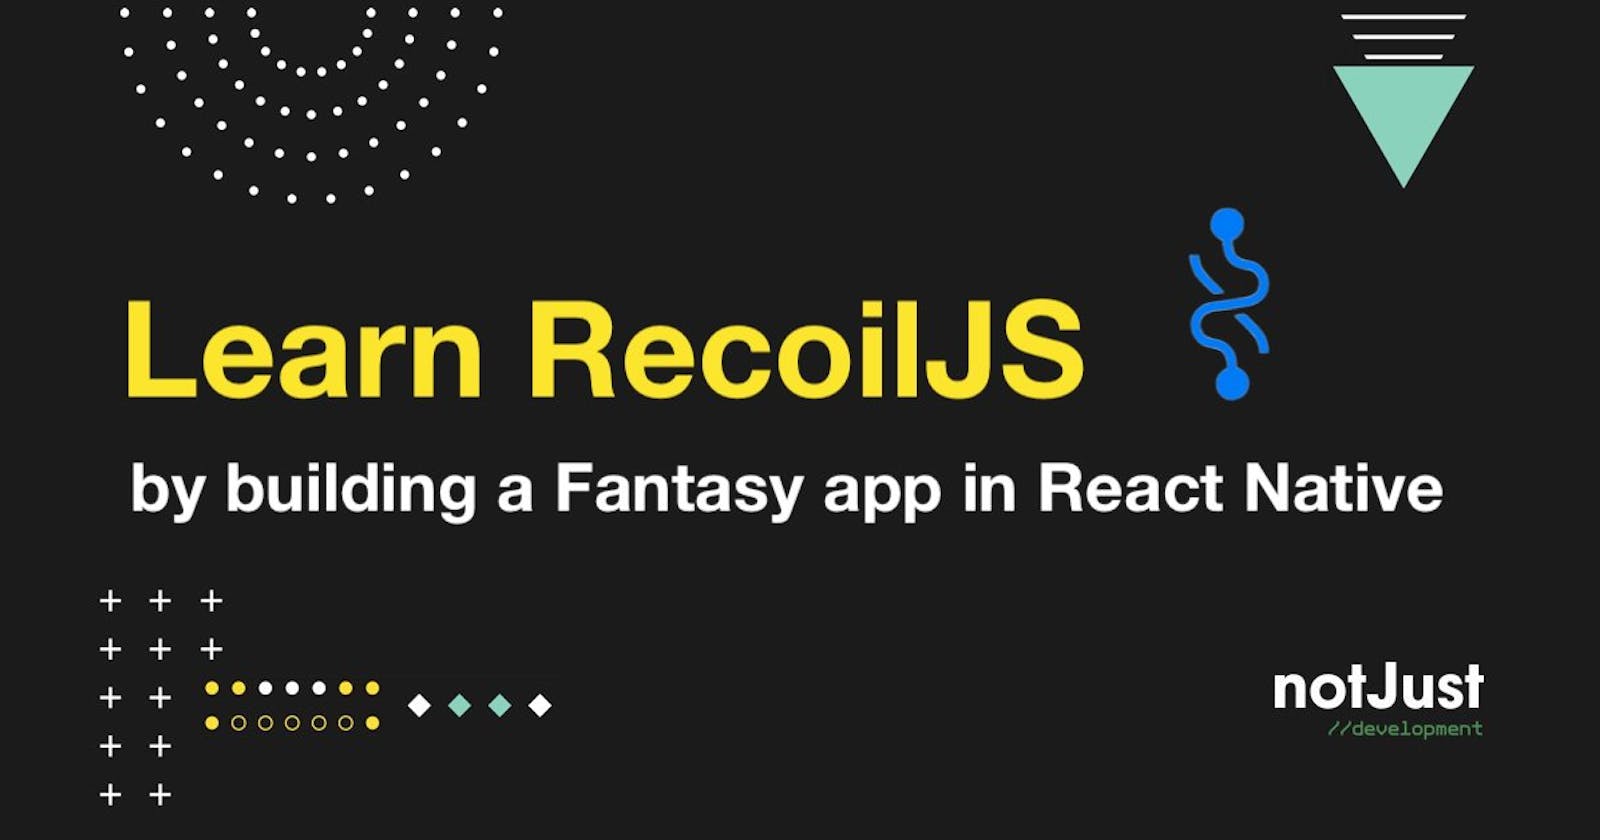 Get started with RecoilJS by building a Fantasy app in React Native